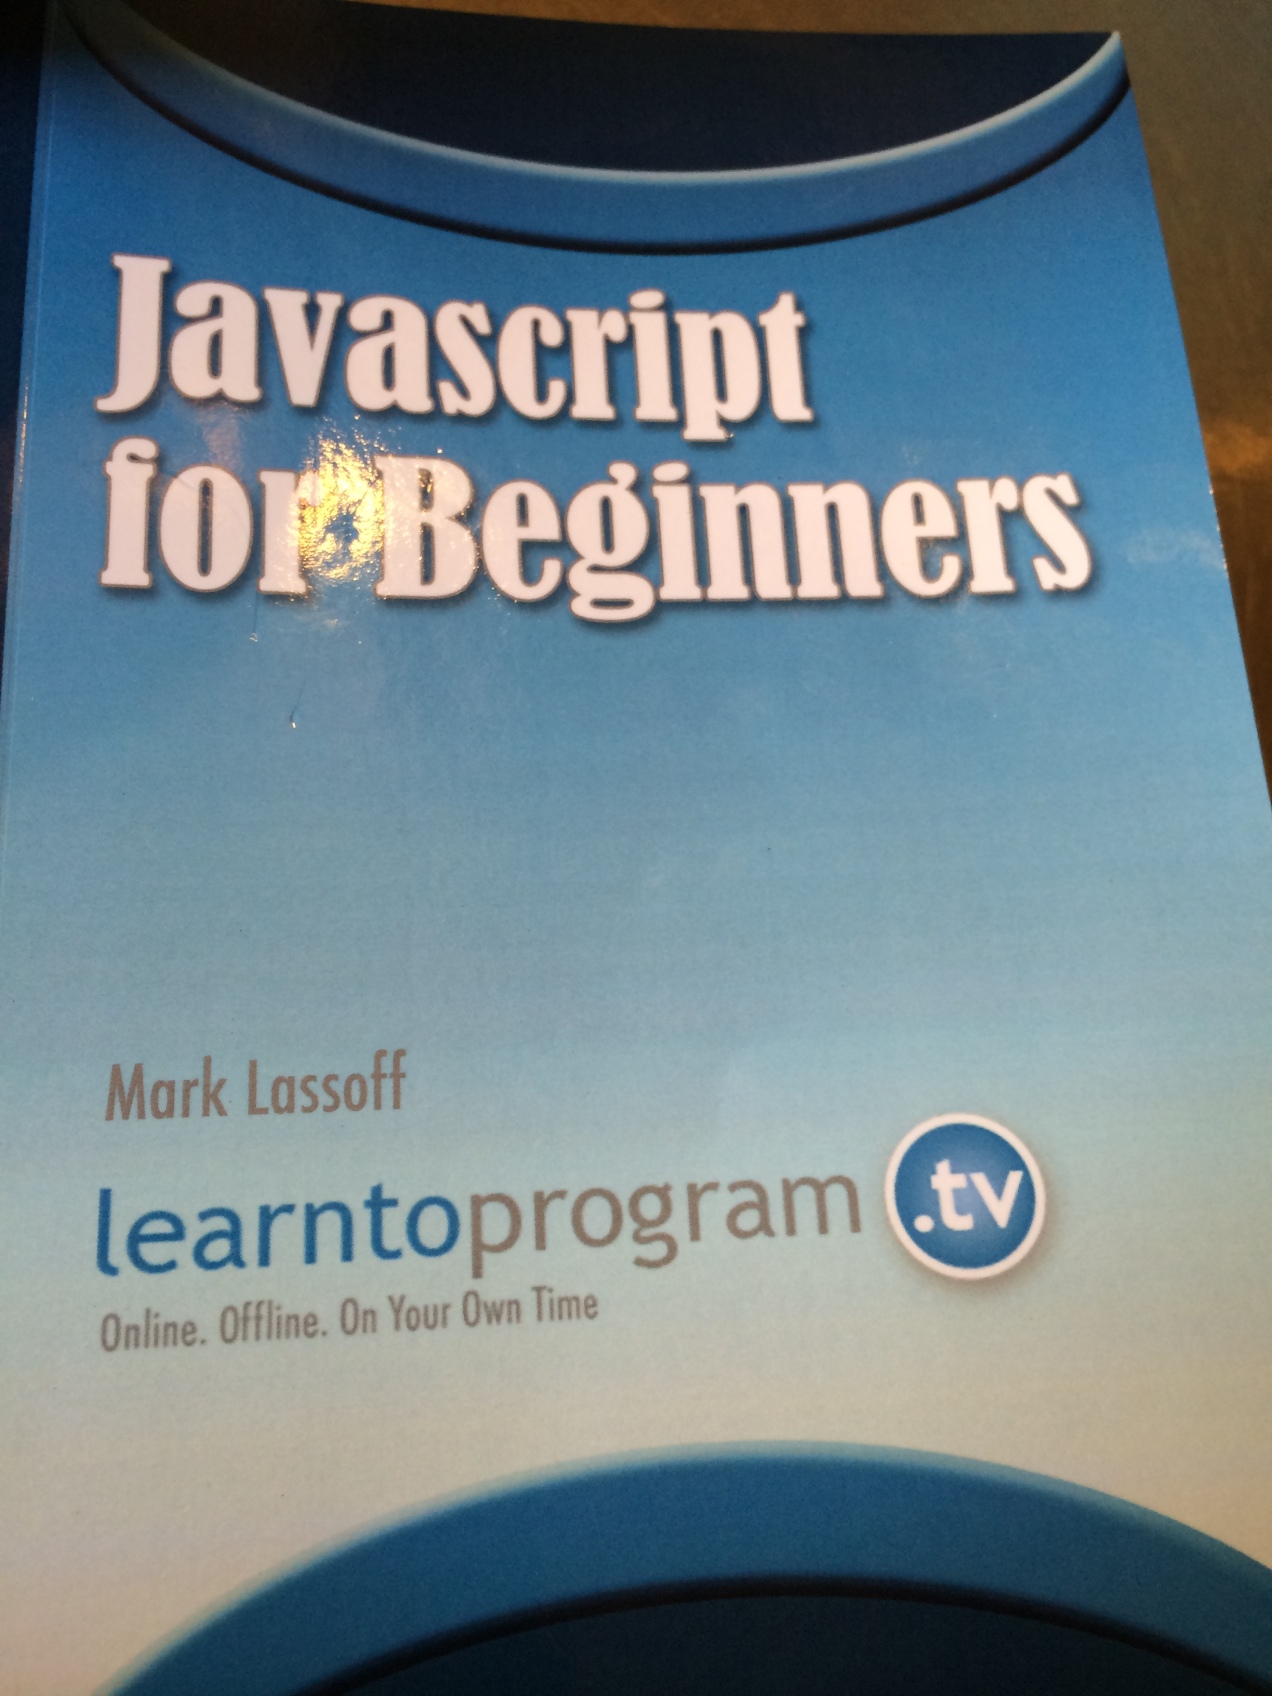 Saturday Activities and the next subject to learn - JavaScript!